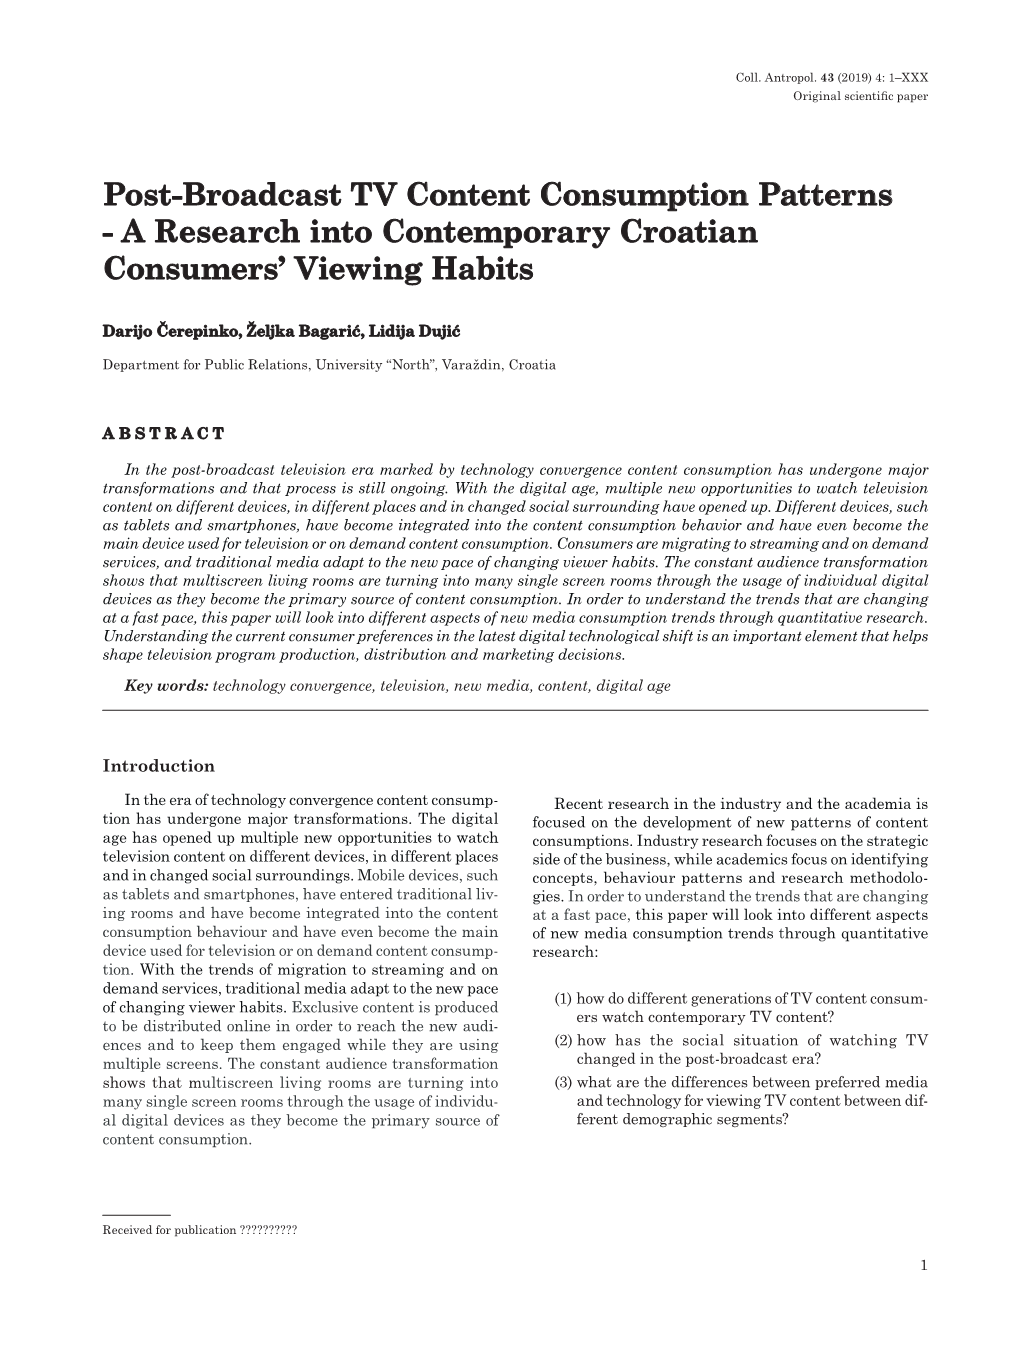 Post-Broadcast TV Content Consumption Patterns - a Research Into Contemporary Croatian Consumers’ Viewing Habits